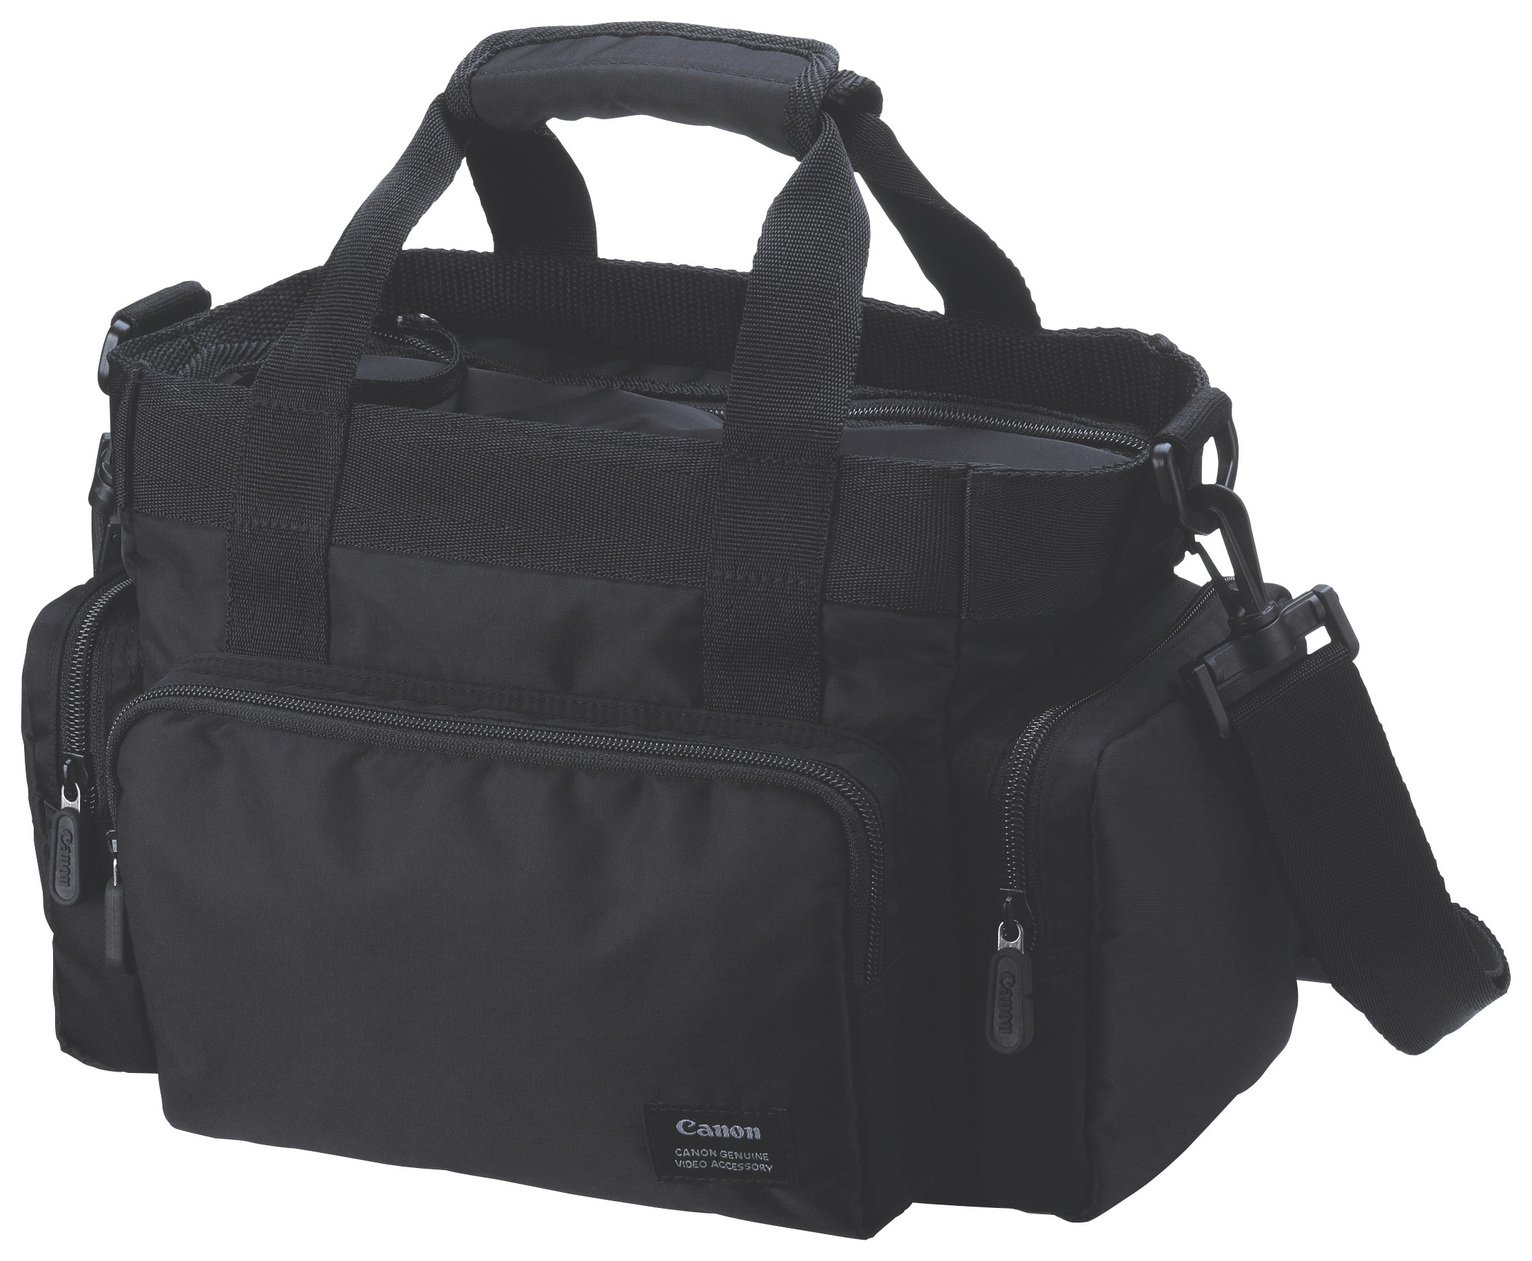 Canon Soft System Camcorder Bag